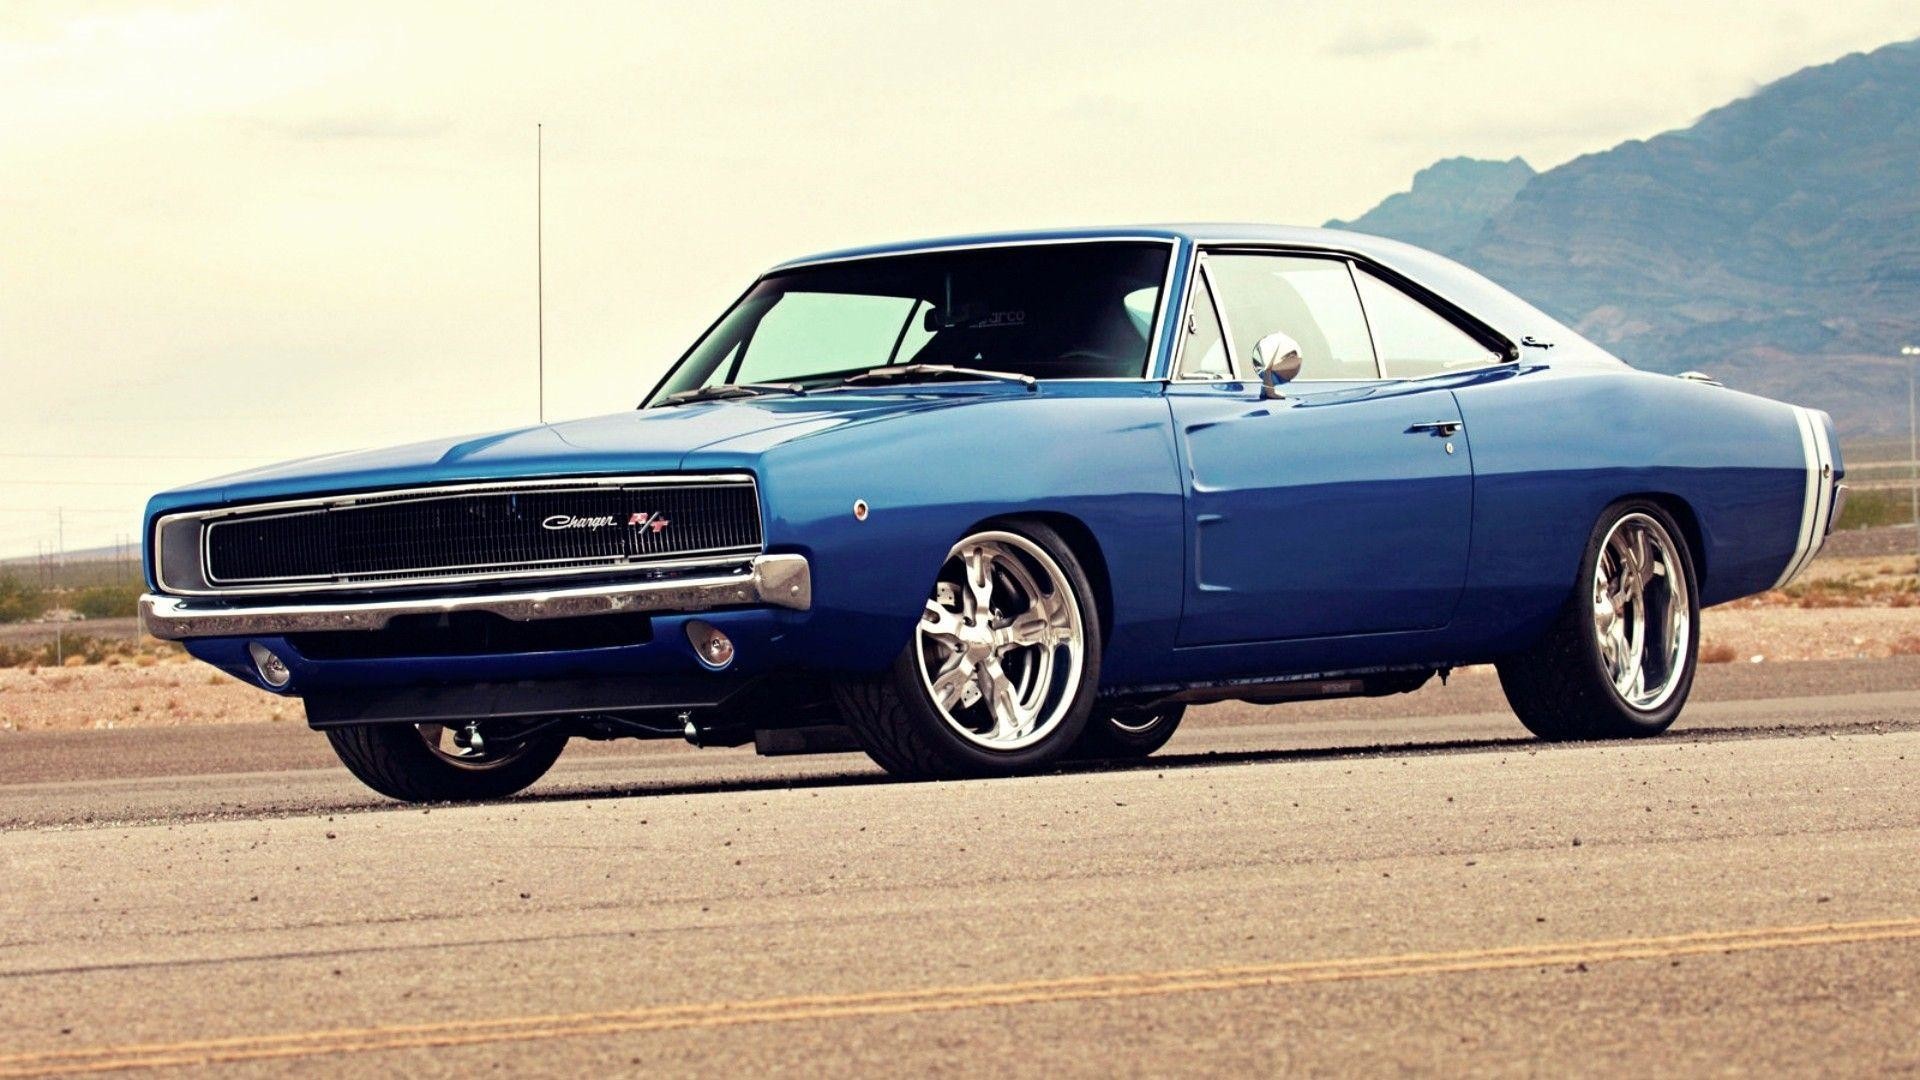 Dodge Charger Wallpaper HD Image